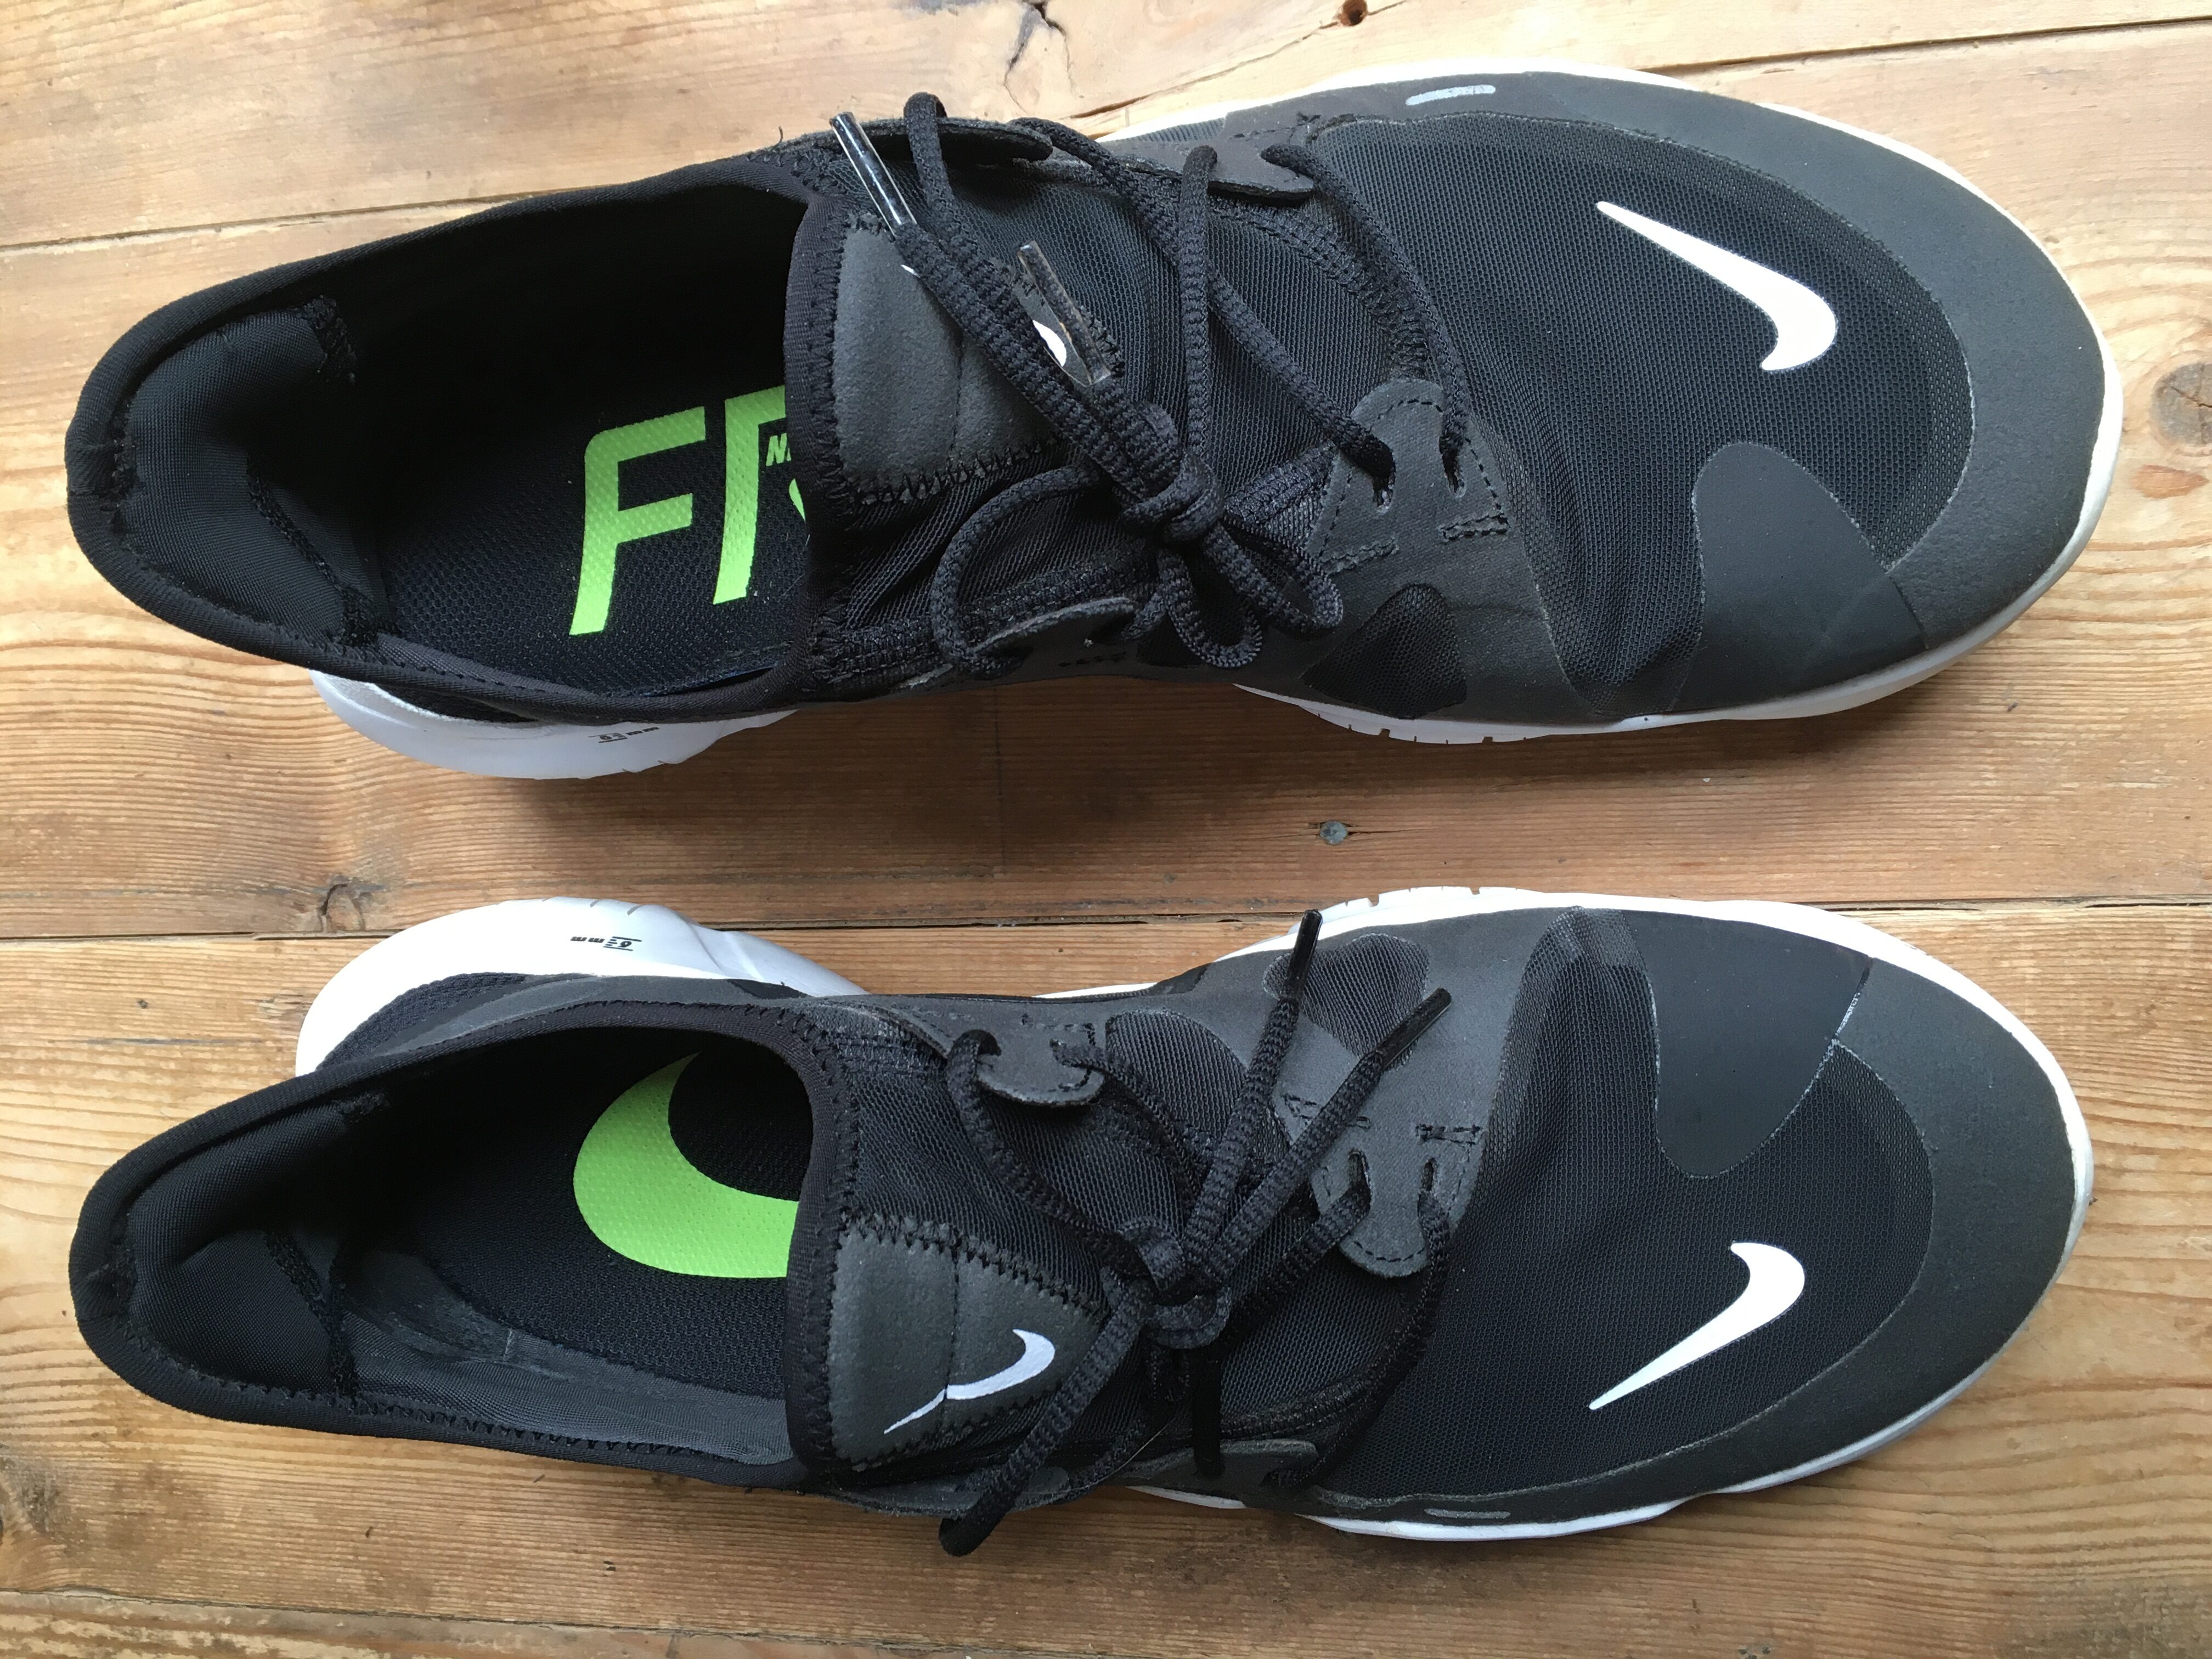 Nike Free RN 5.0 2020 - Running Shoe Review - Better Sore Than Sorry